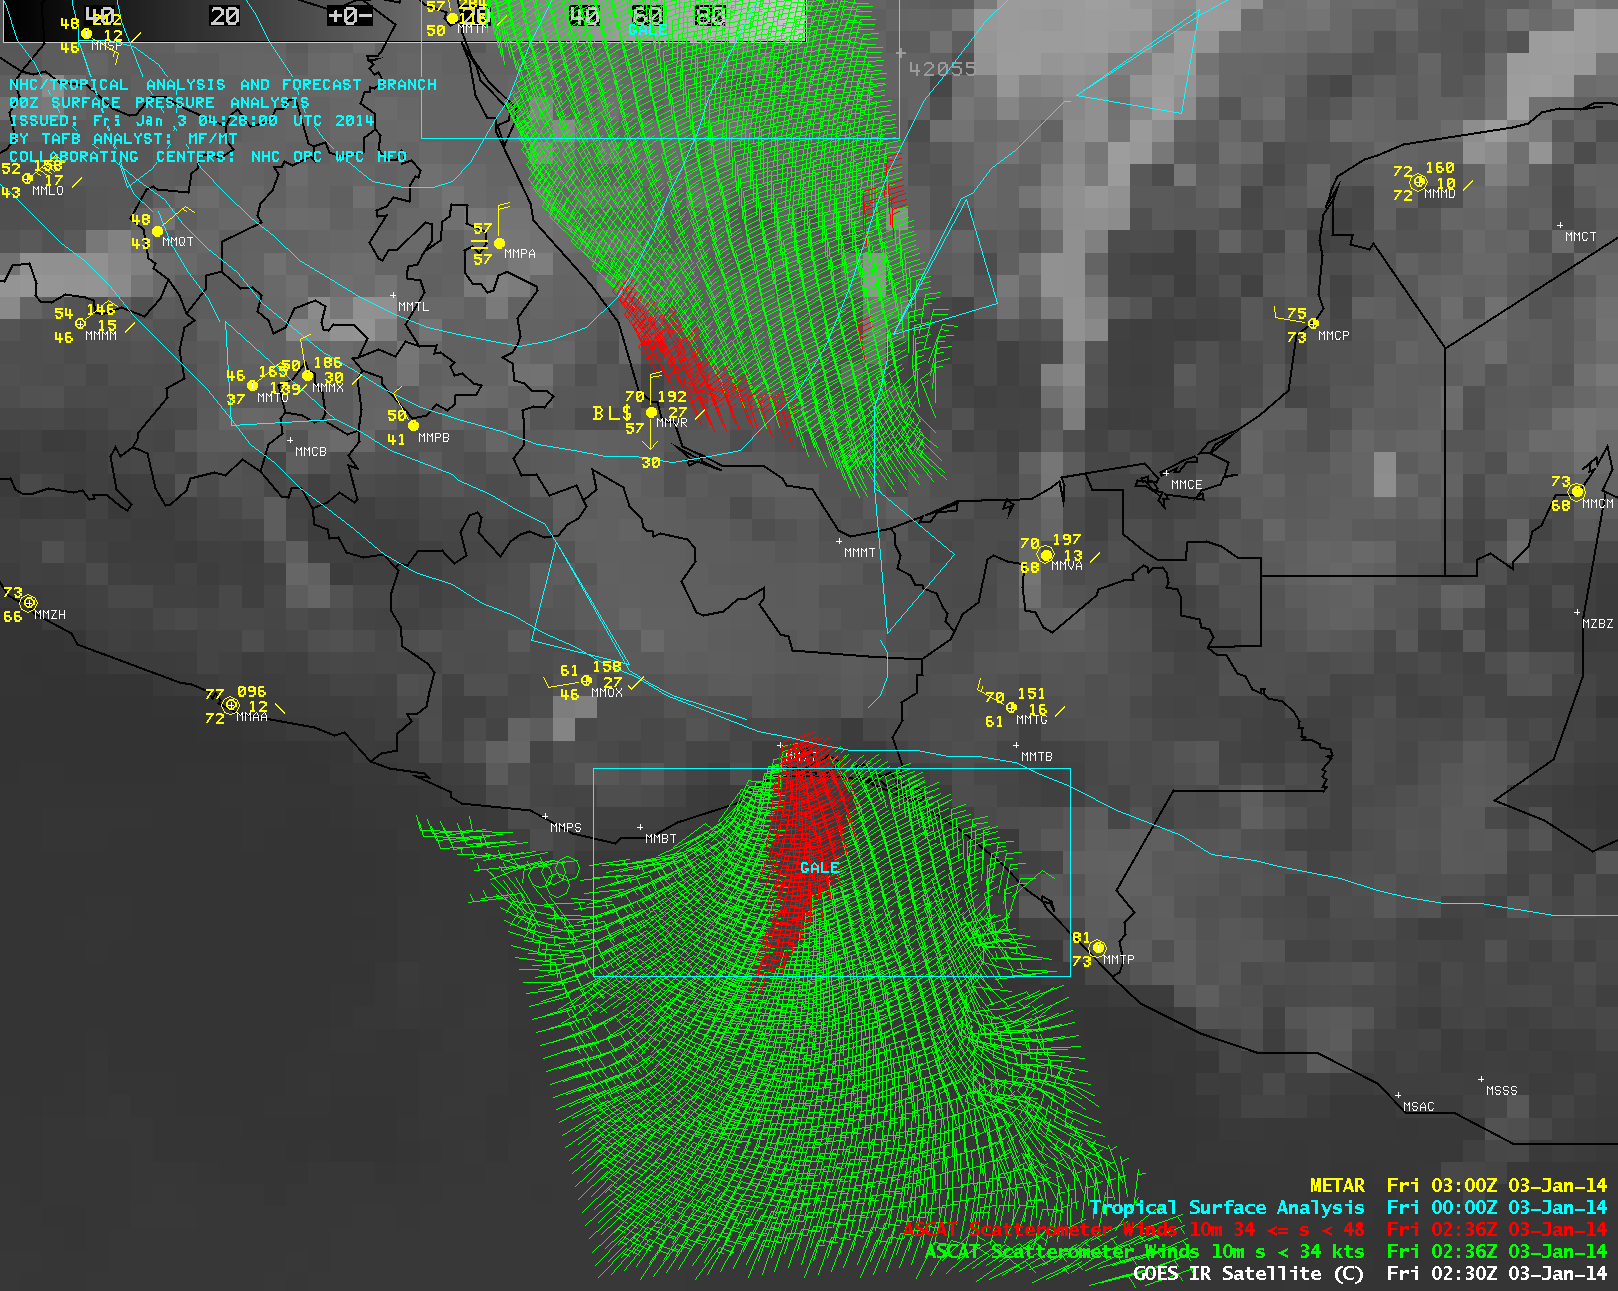 GOES-13 10.7 Âµm IR image, with Metop ASCAT surface scatterometer winds